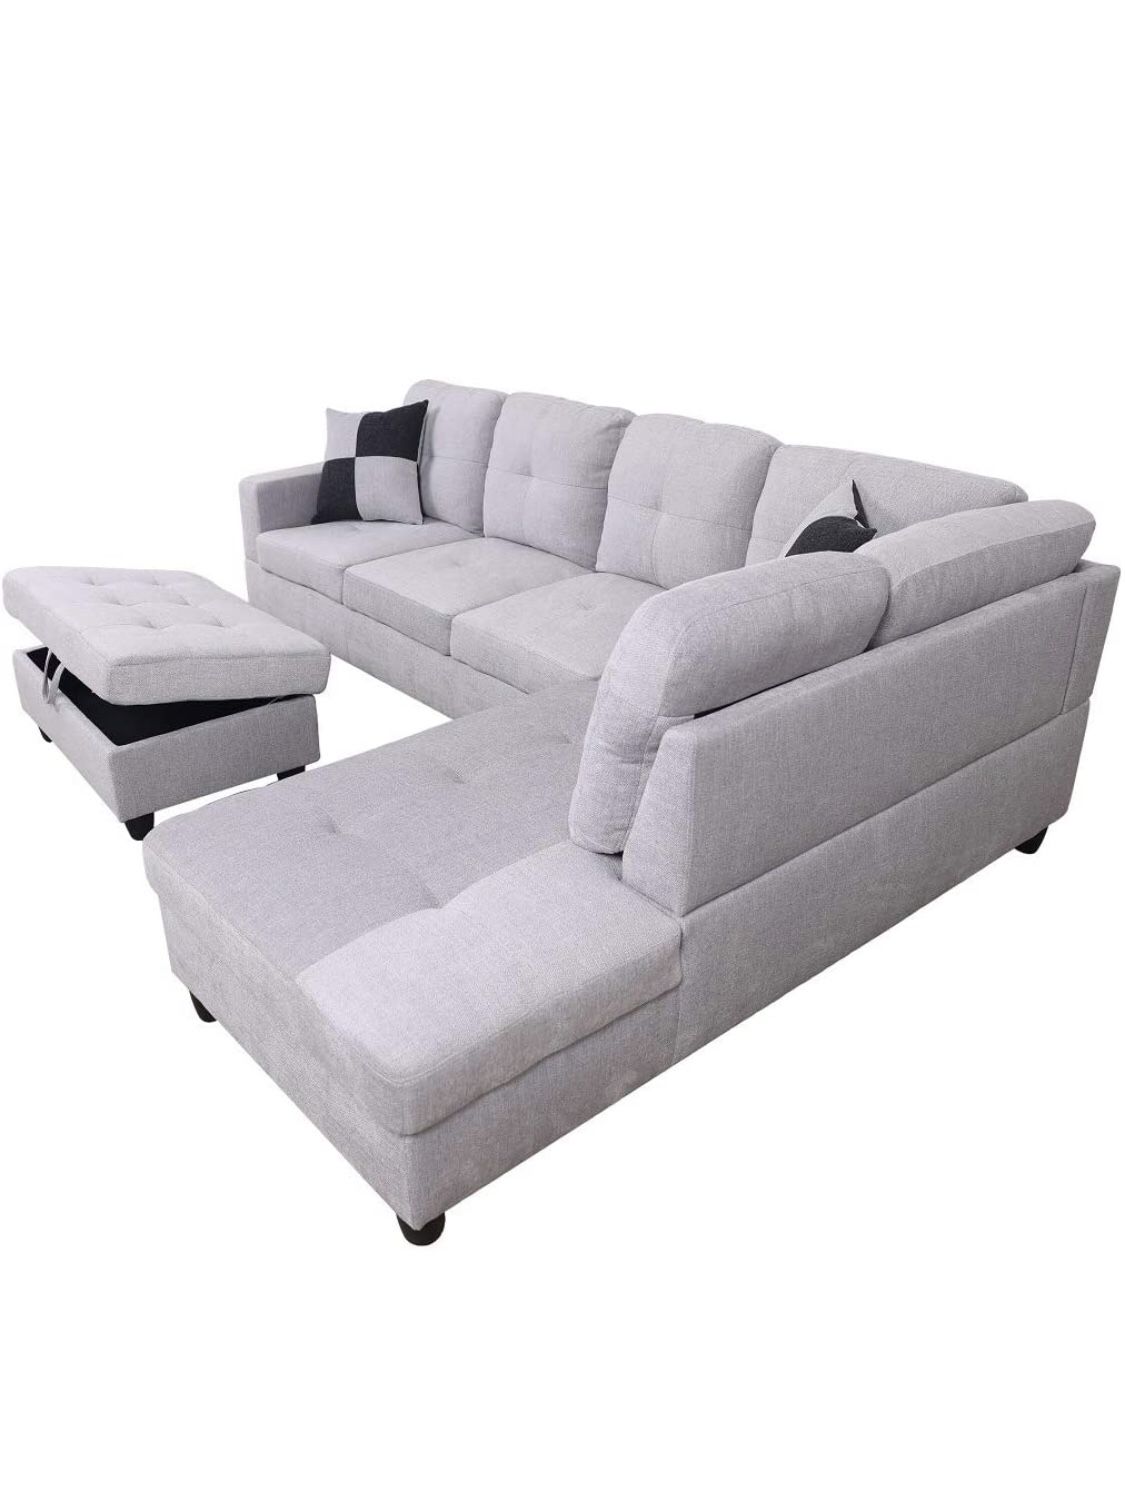 Gray-white sectional Couch sofa. linen. New